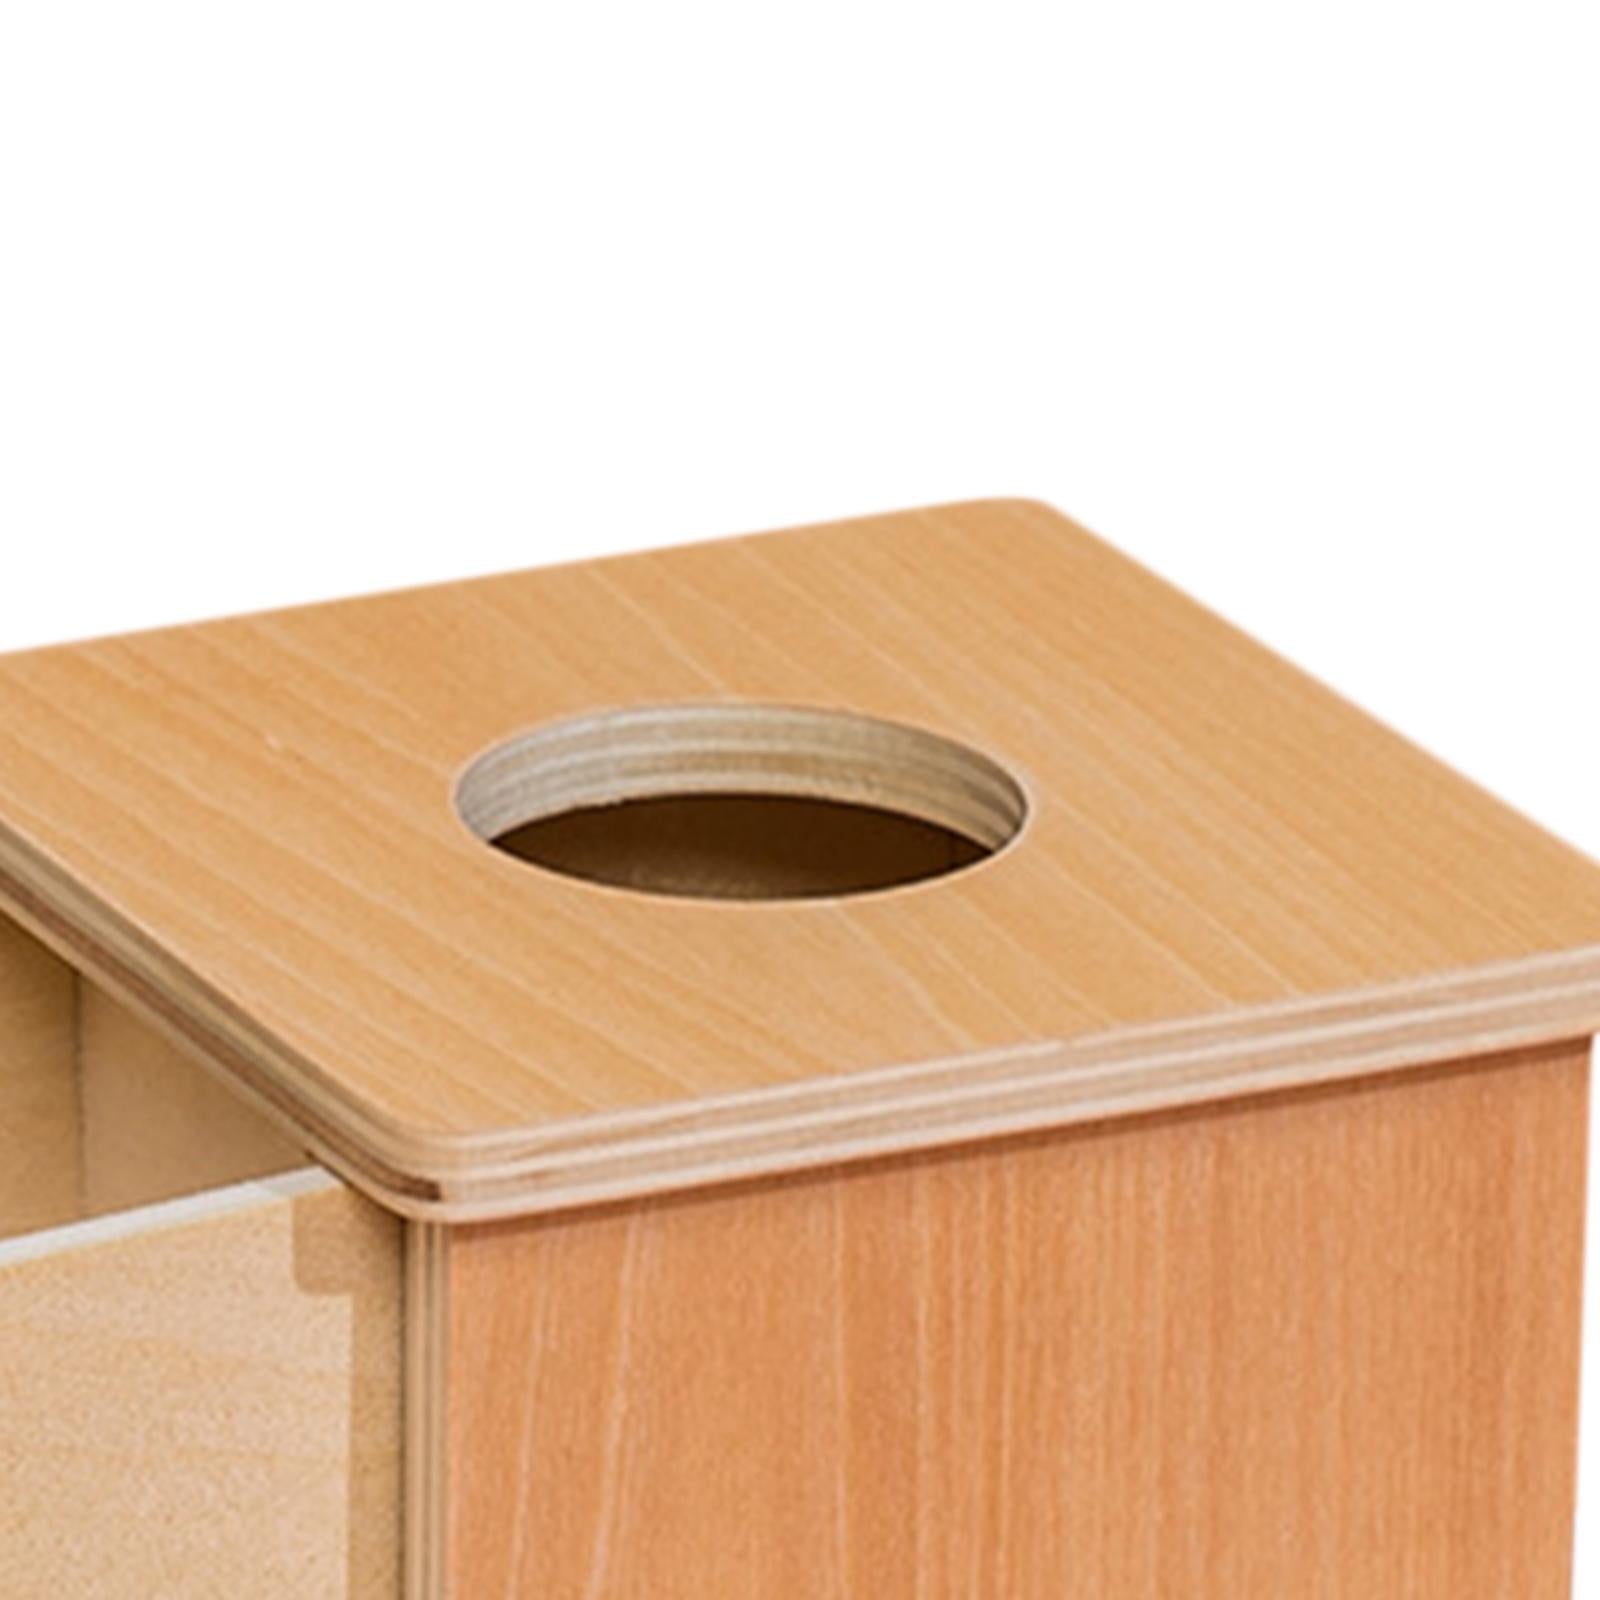 Top, circular slot on wooden object permanence box